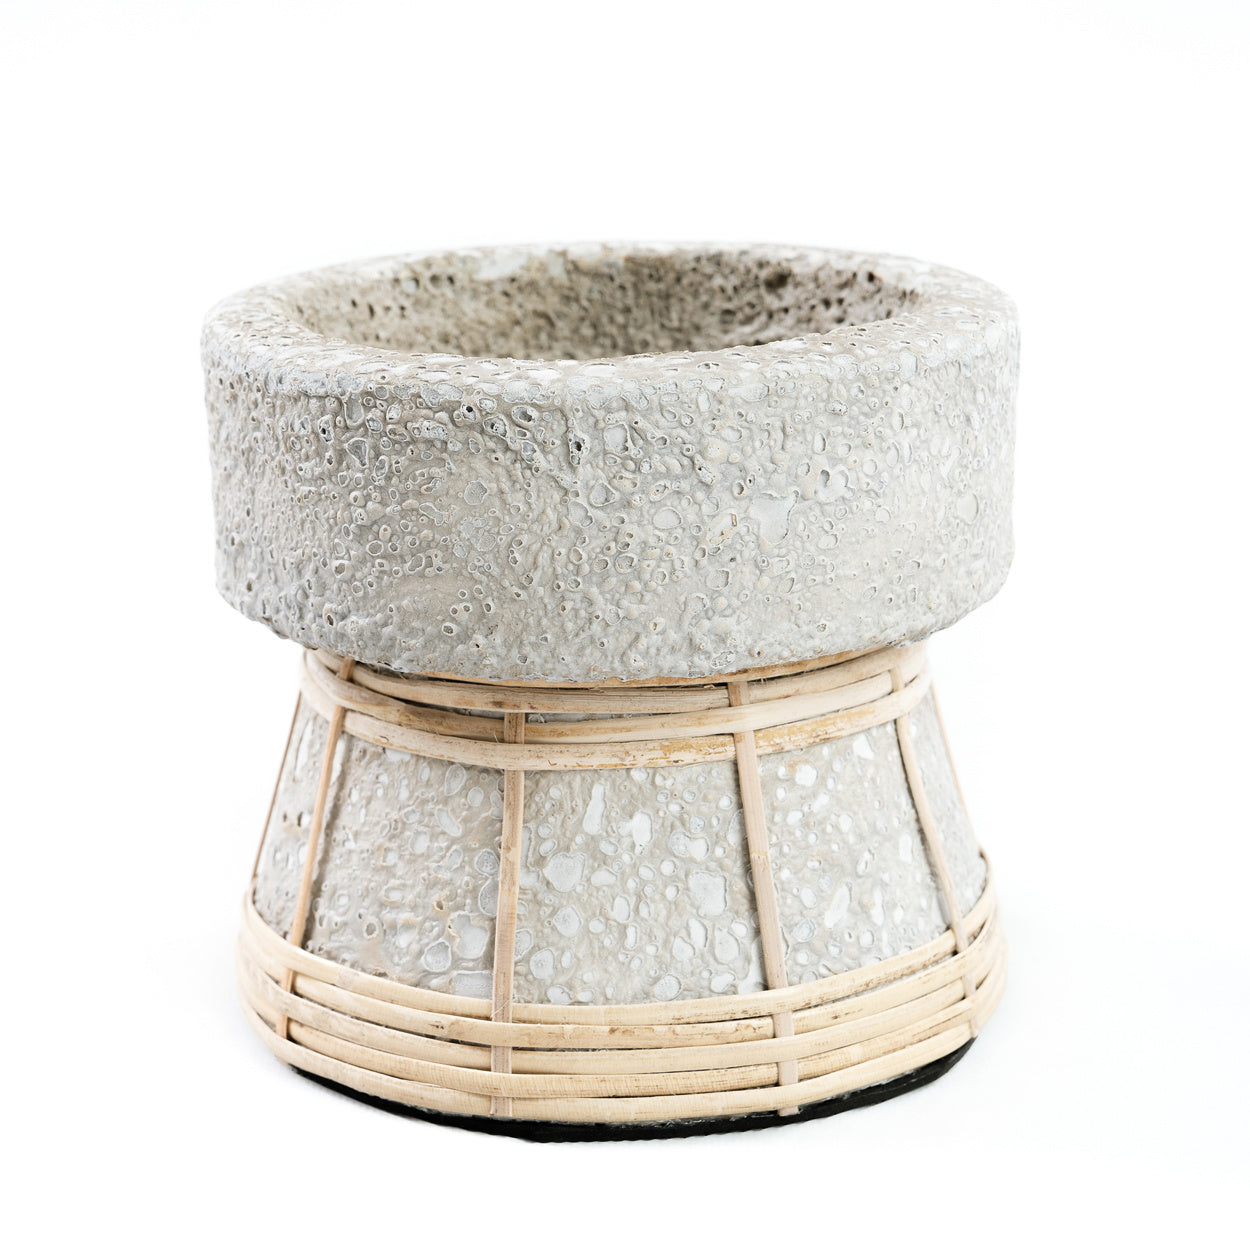 THE SERENE Candle Holder - Concrete Natural Small Size